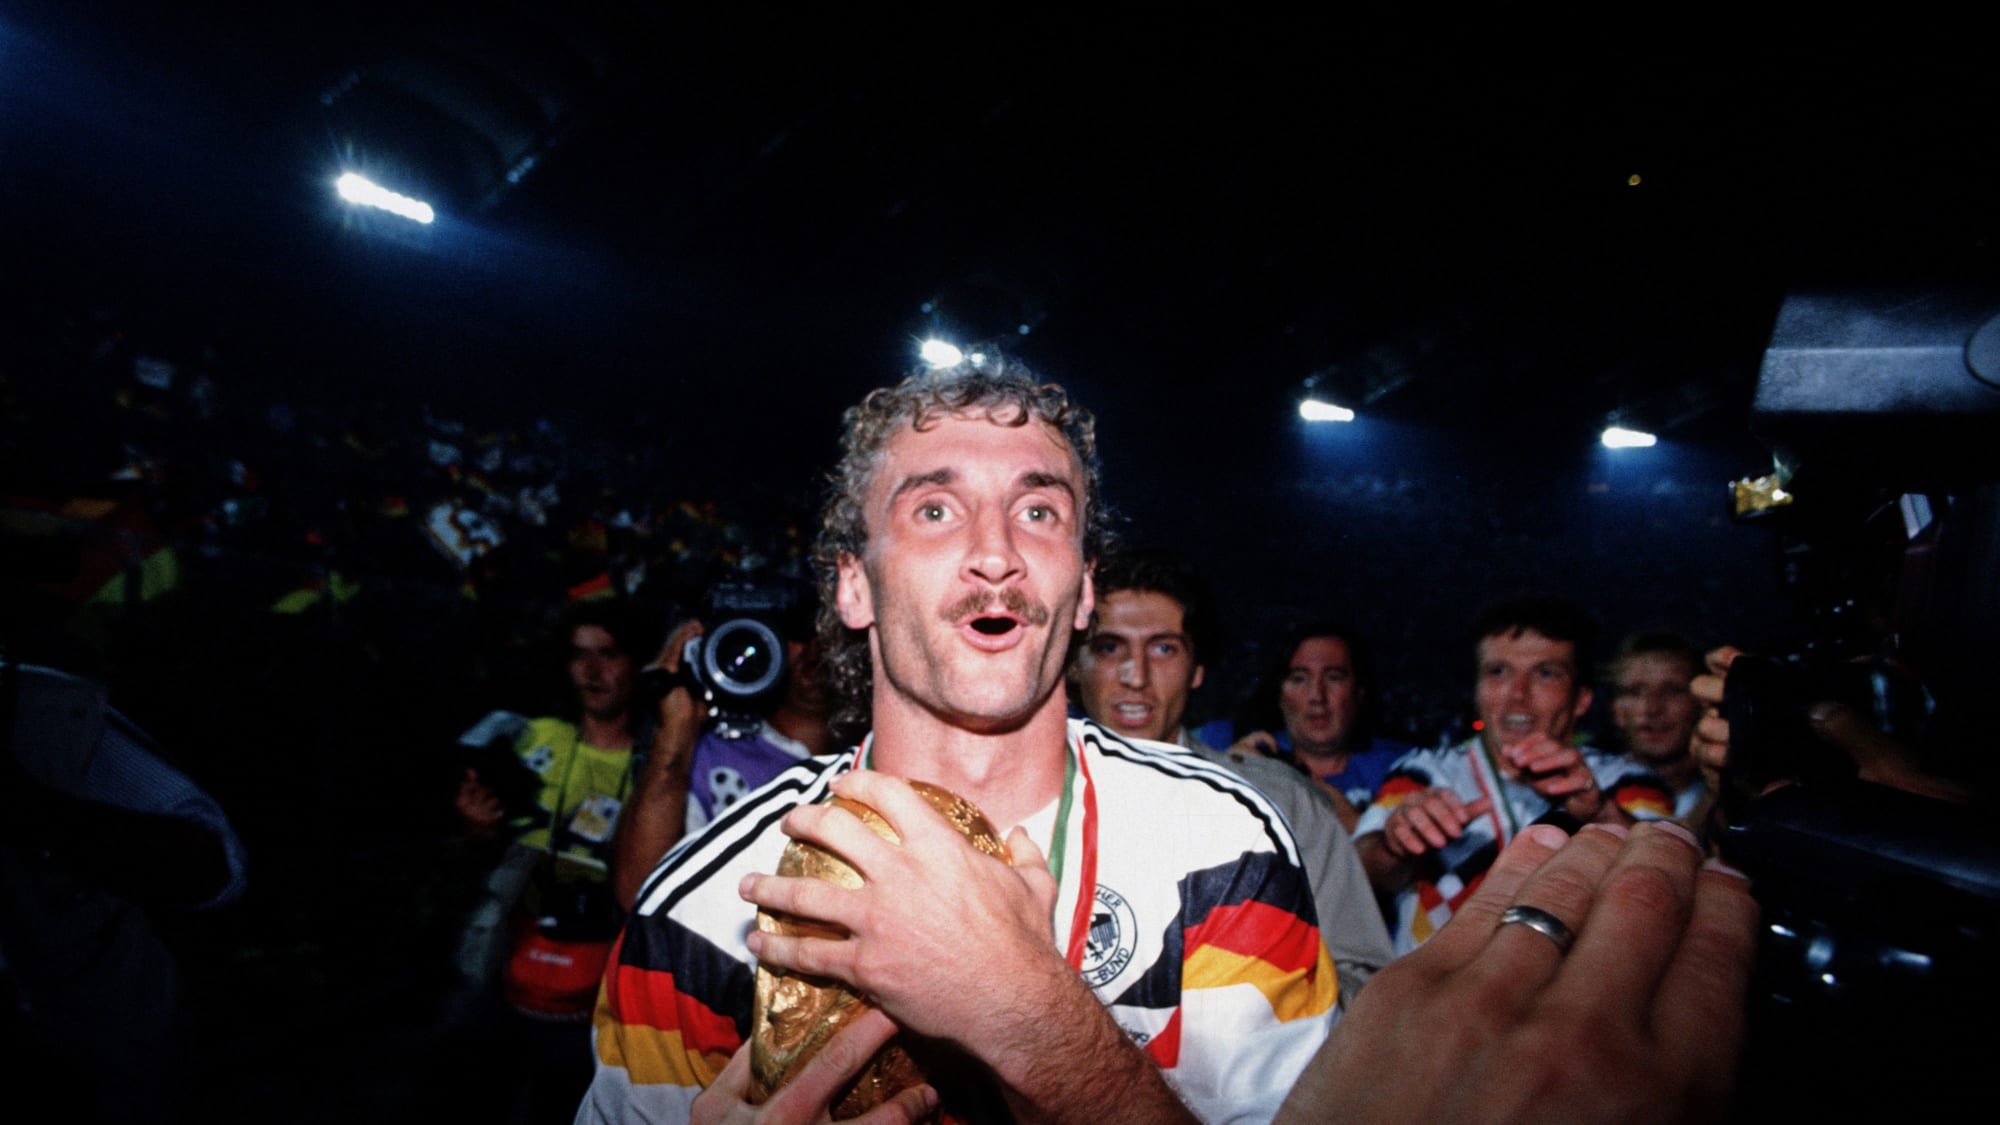 ROME, ITALY - JULY 08:  Rudi Voeller of Germany holds the trophy after the German team won the FIFA World Championship final match between Argentina and Germany on July 8, 1990 in Rome, Italy. Germany won the match 1:0(Photo by Bongarts/Getty Images) 